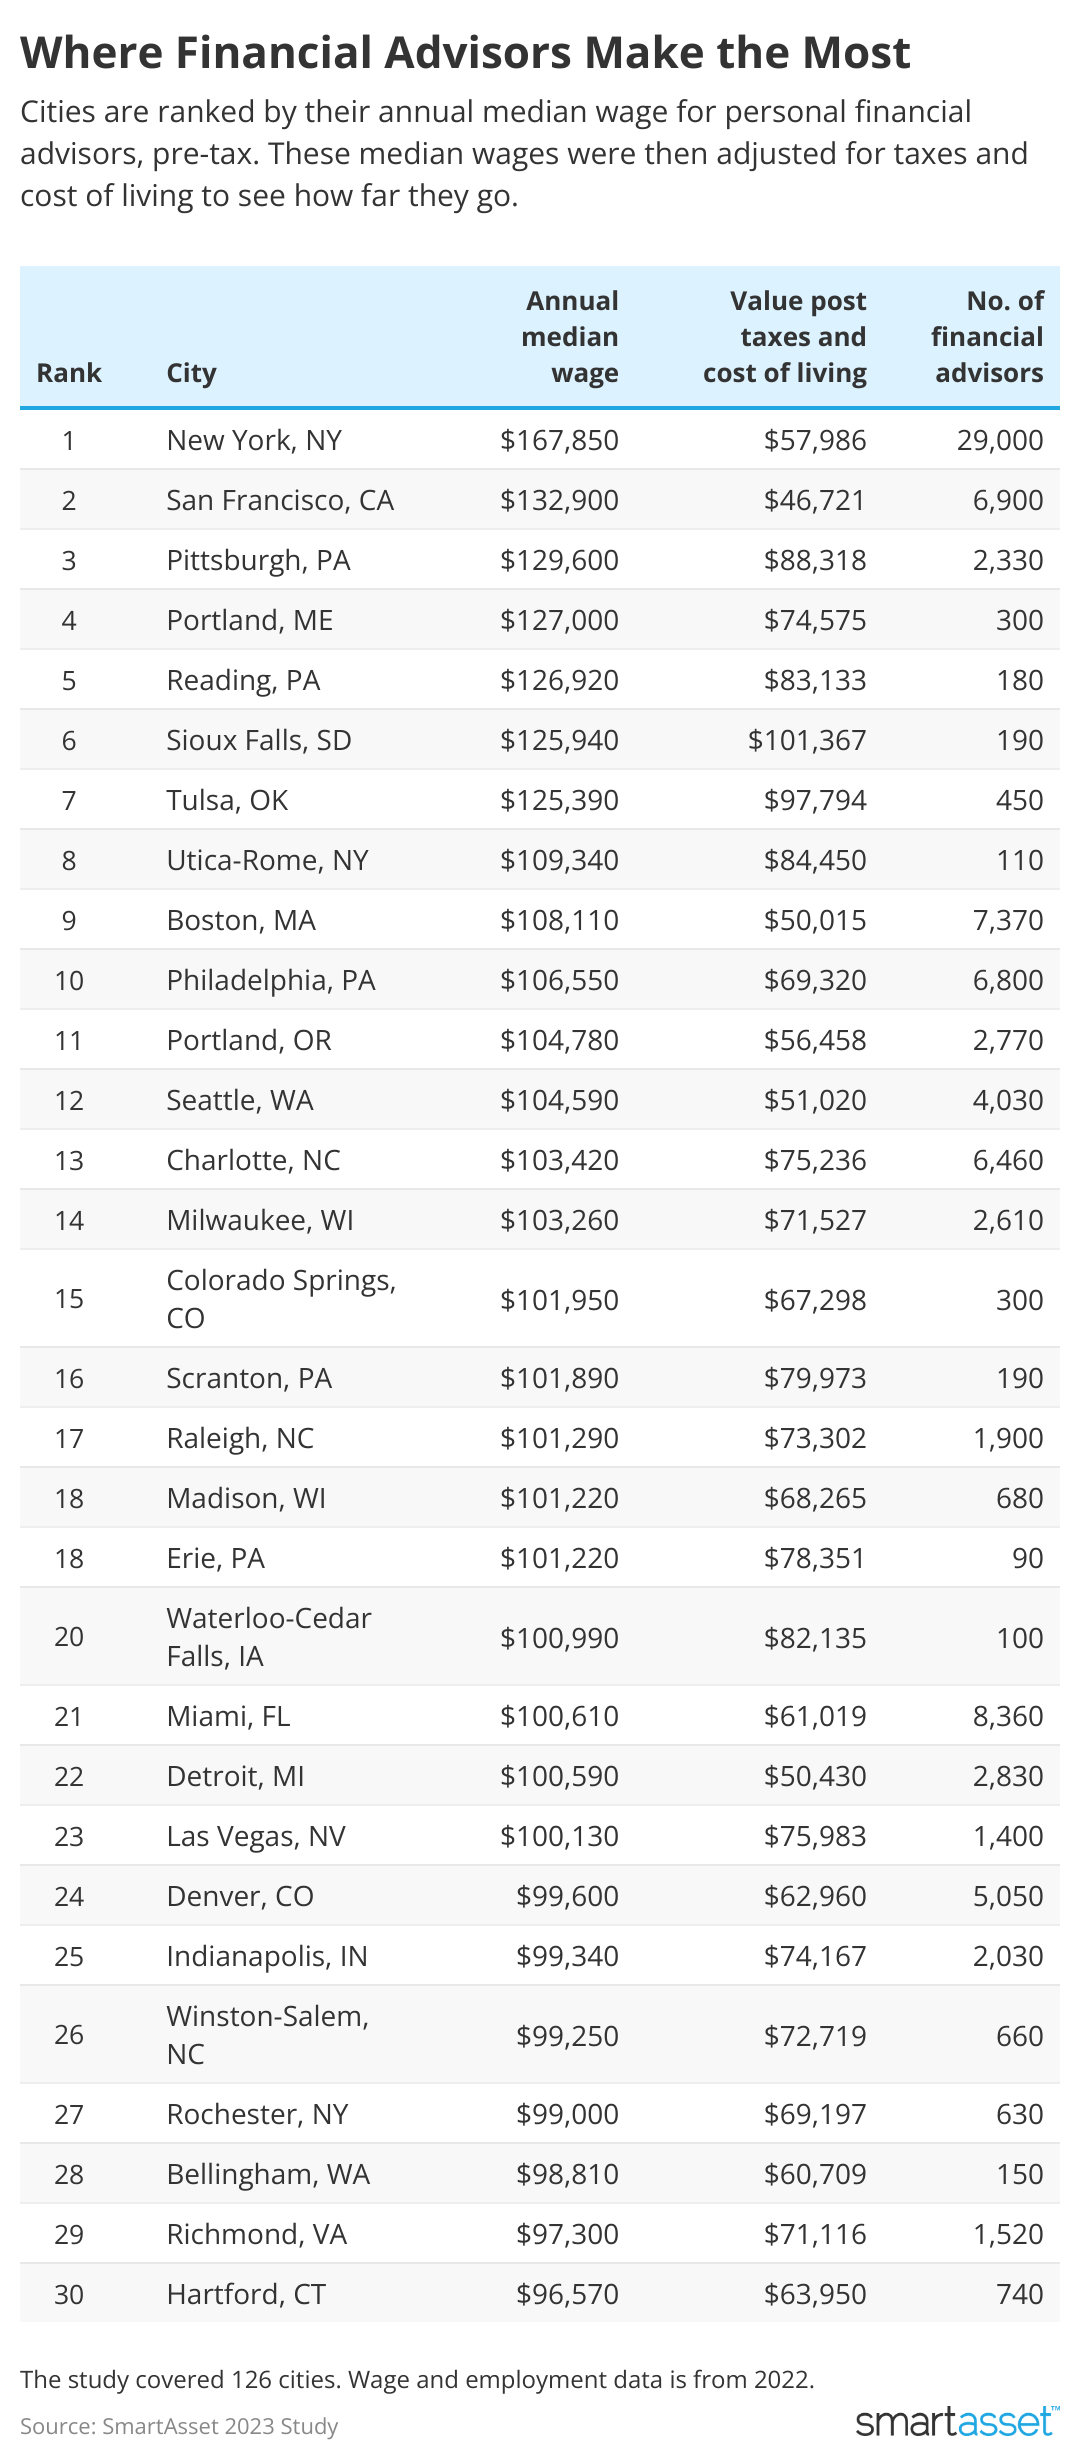 A table listing the 30 U.S. cities where financial advisors make the most money.